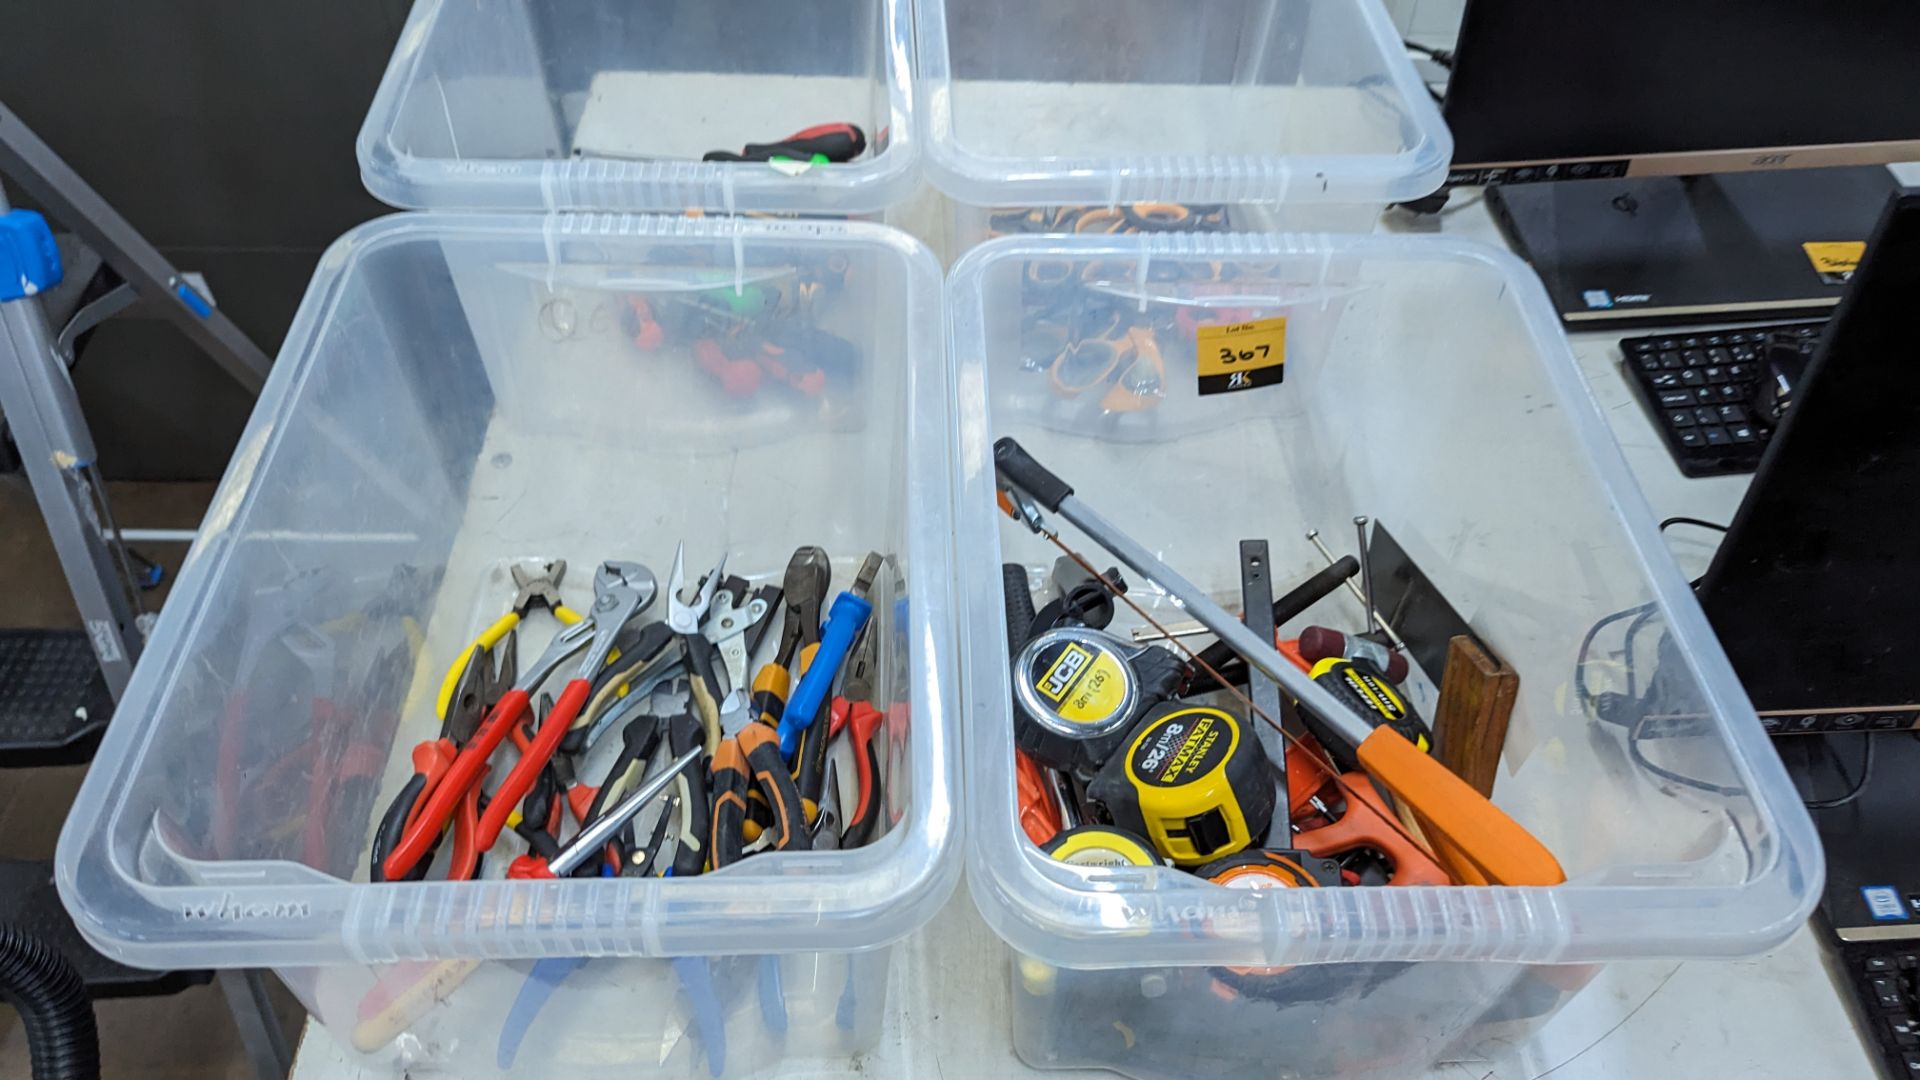 Contents of 4 tubs of tape measures, screwdrivers, hand tools & pliers